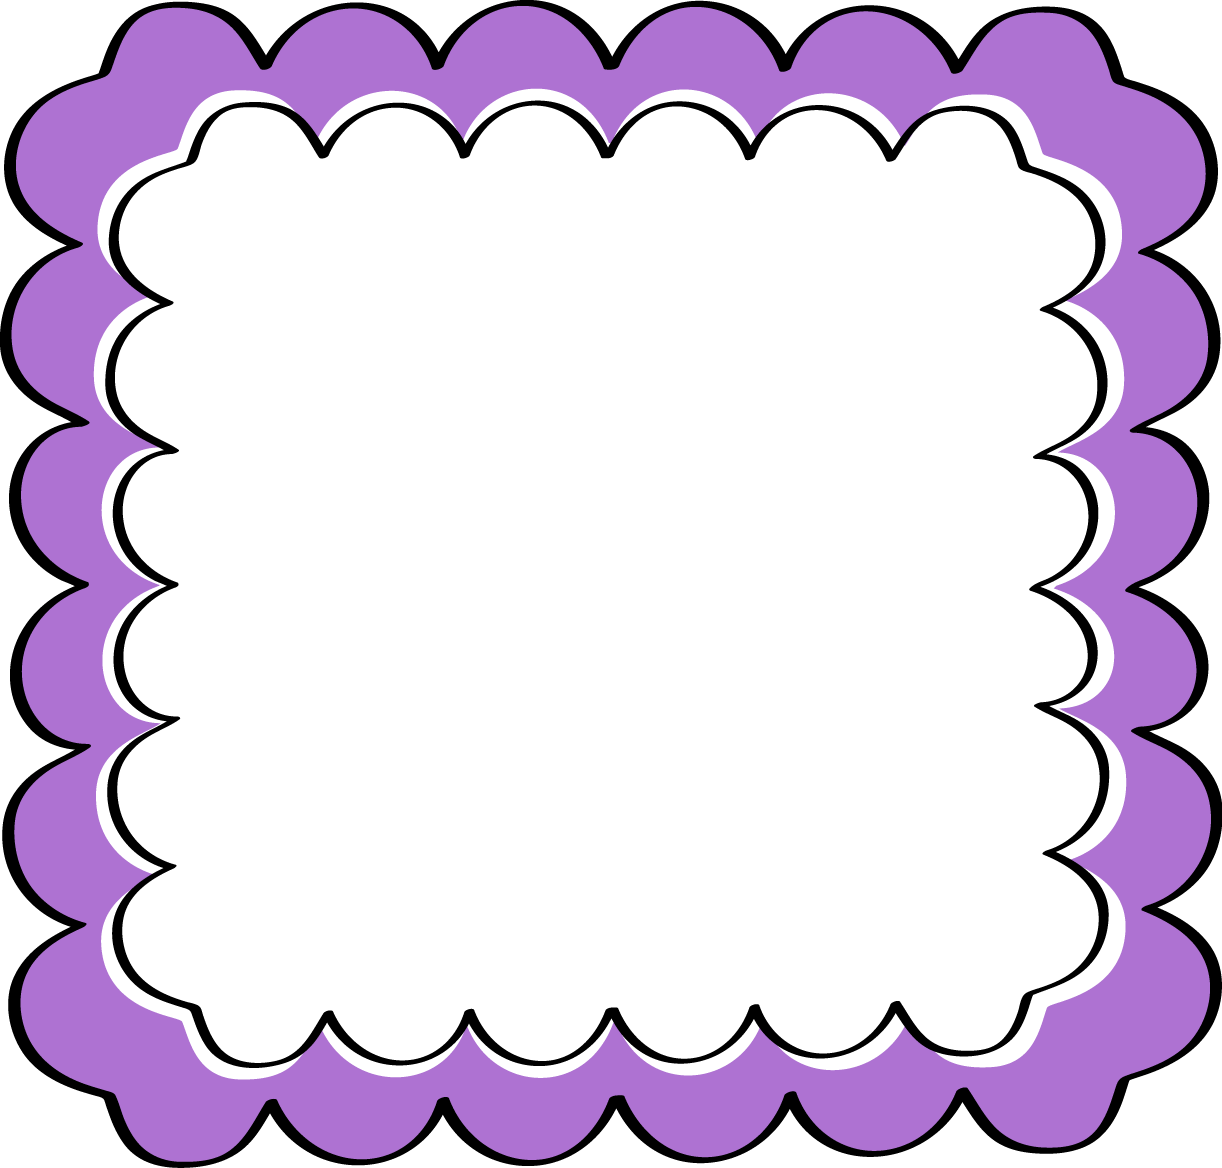 clipart of frames and borders - photo #16